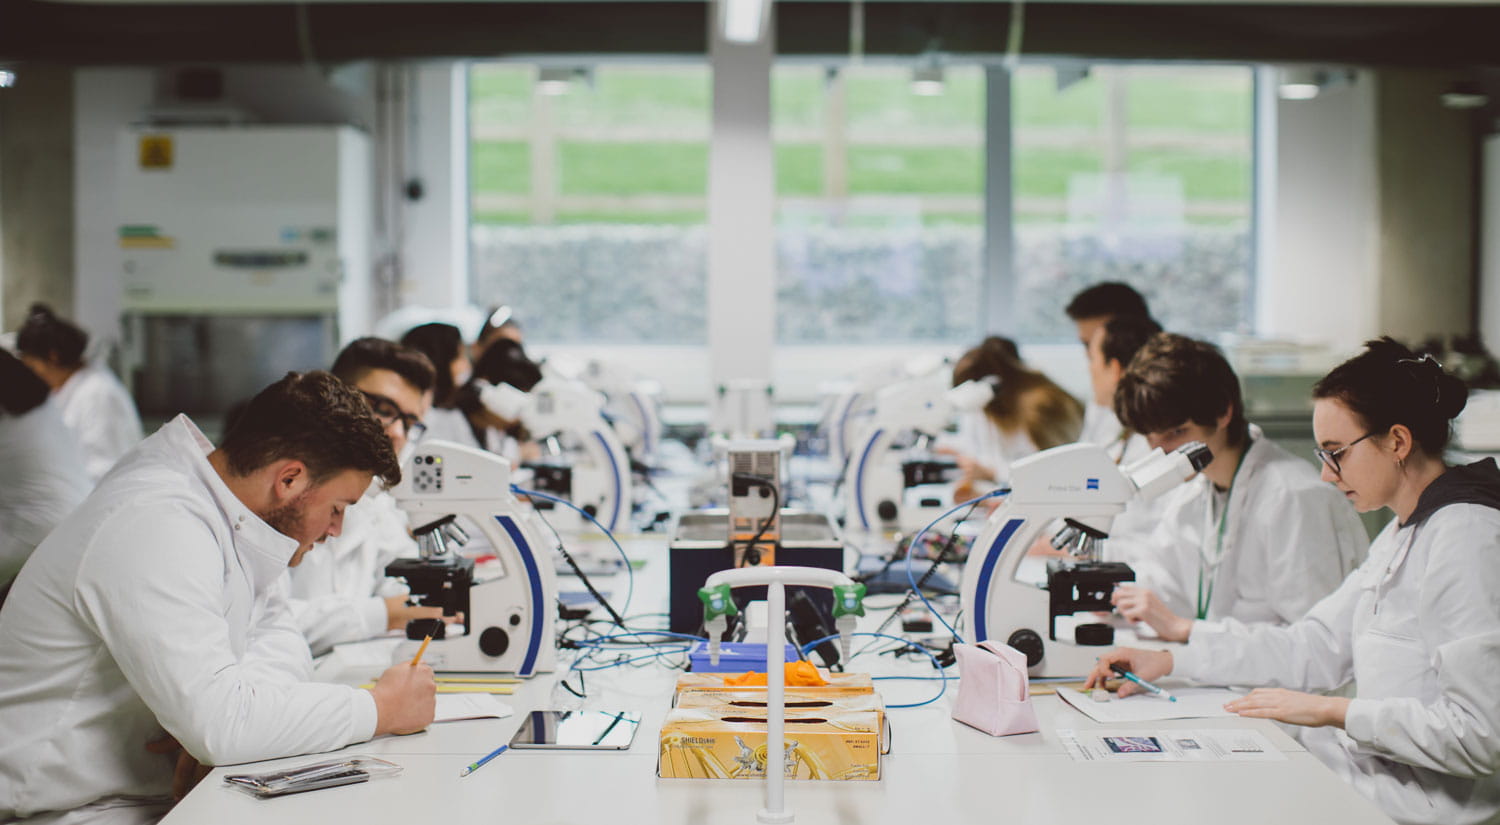 Students sitting in a lab wearing white coats looking into microscopes)